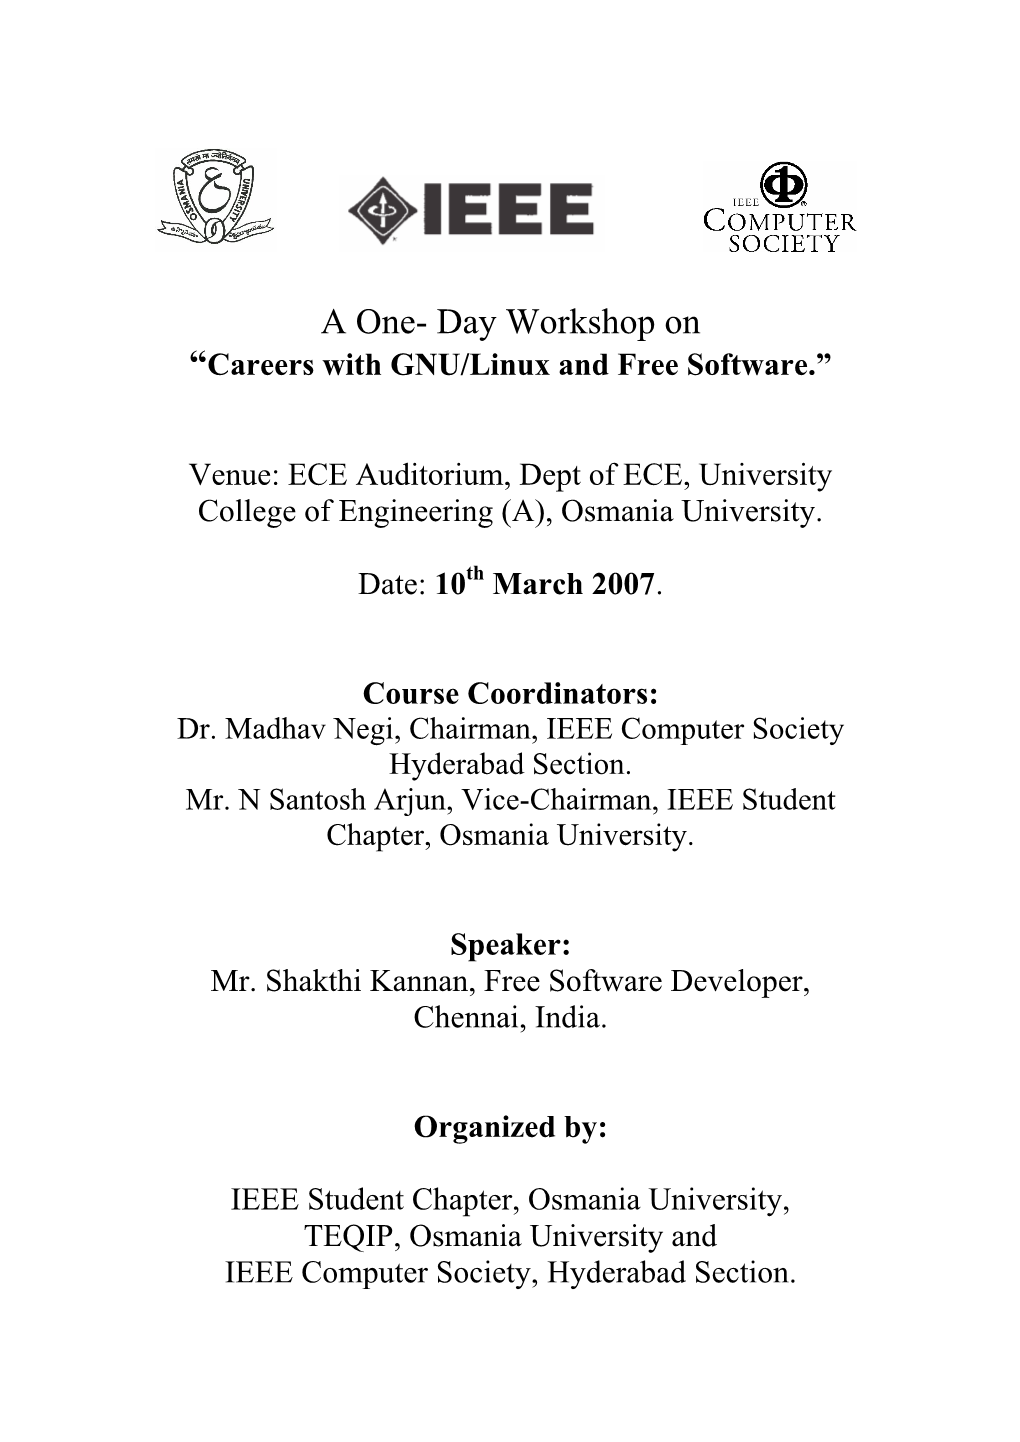 A One- Day Workshop on “Careers with GNU/Linux and Free Software.”